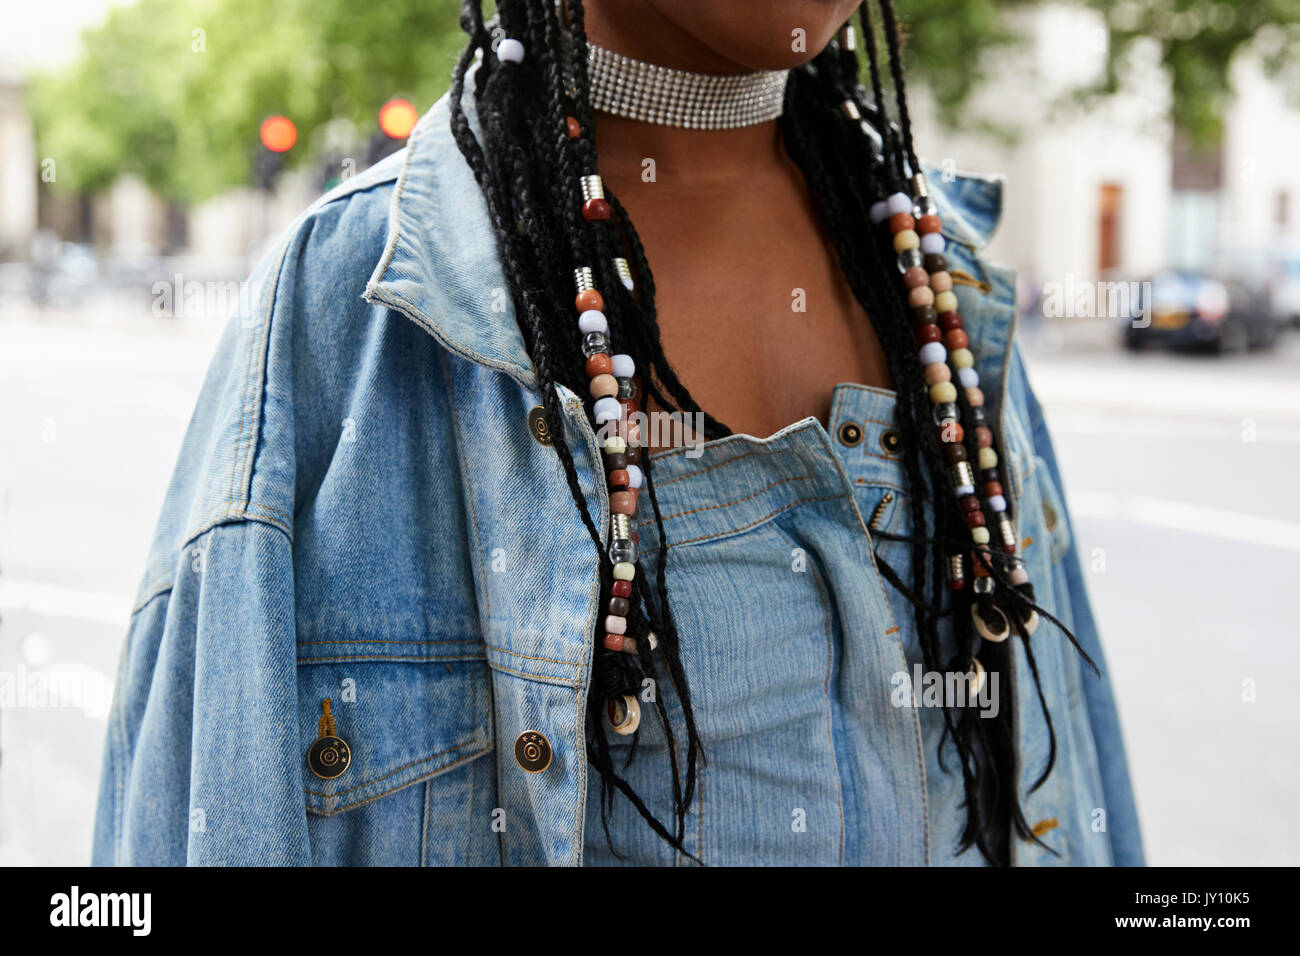 Woman with braided hair wearing denim and a diamante choker Stock Photo